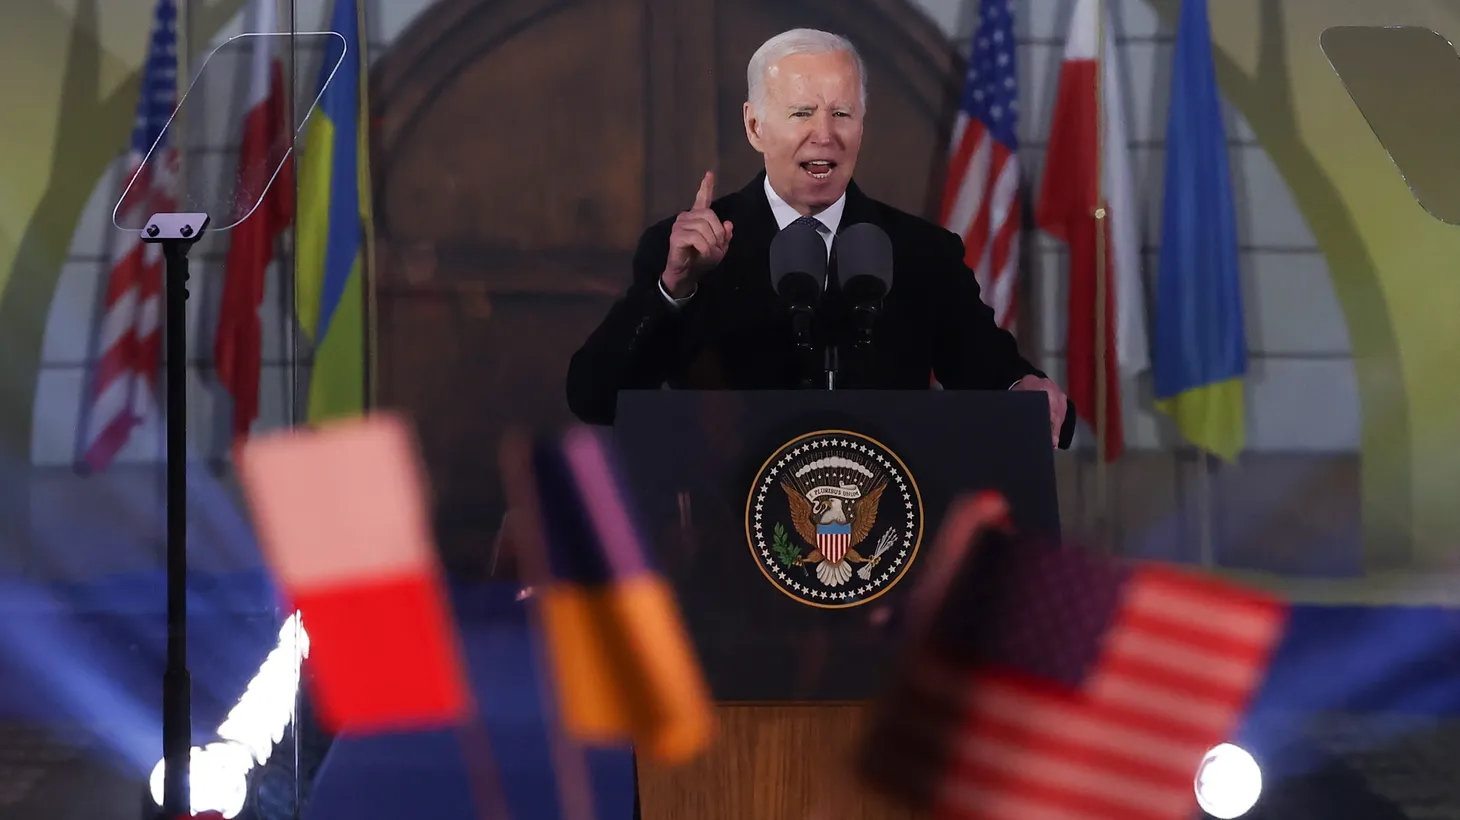 President of the United States Joe Biden delivers the speech in Warsaw, Poland on February 21, 2023 after the unexpected visit to Kyiv, Ukraine.